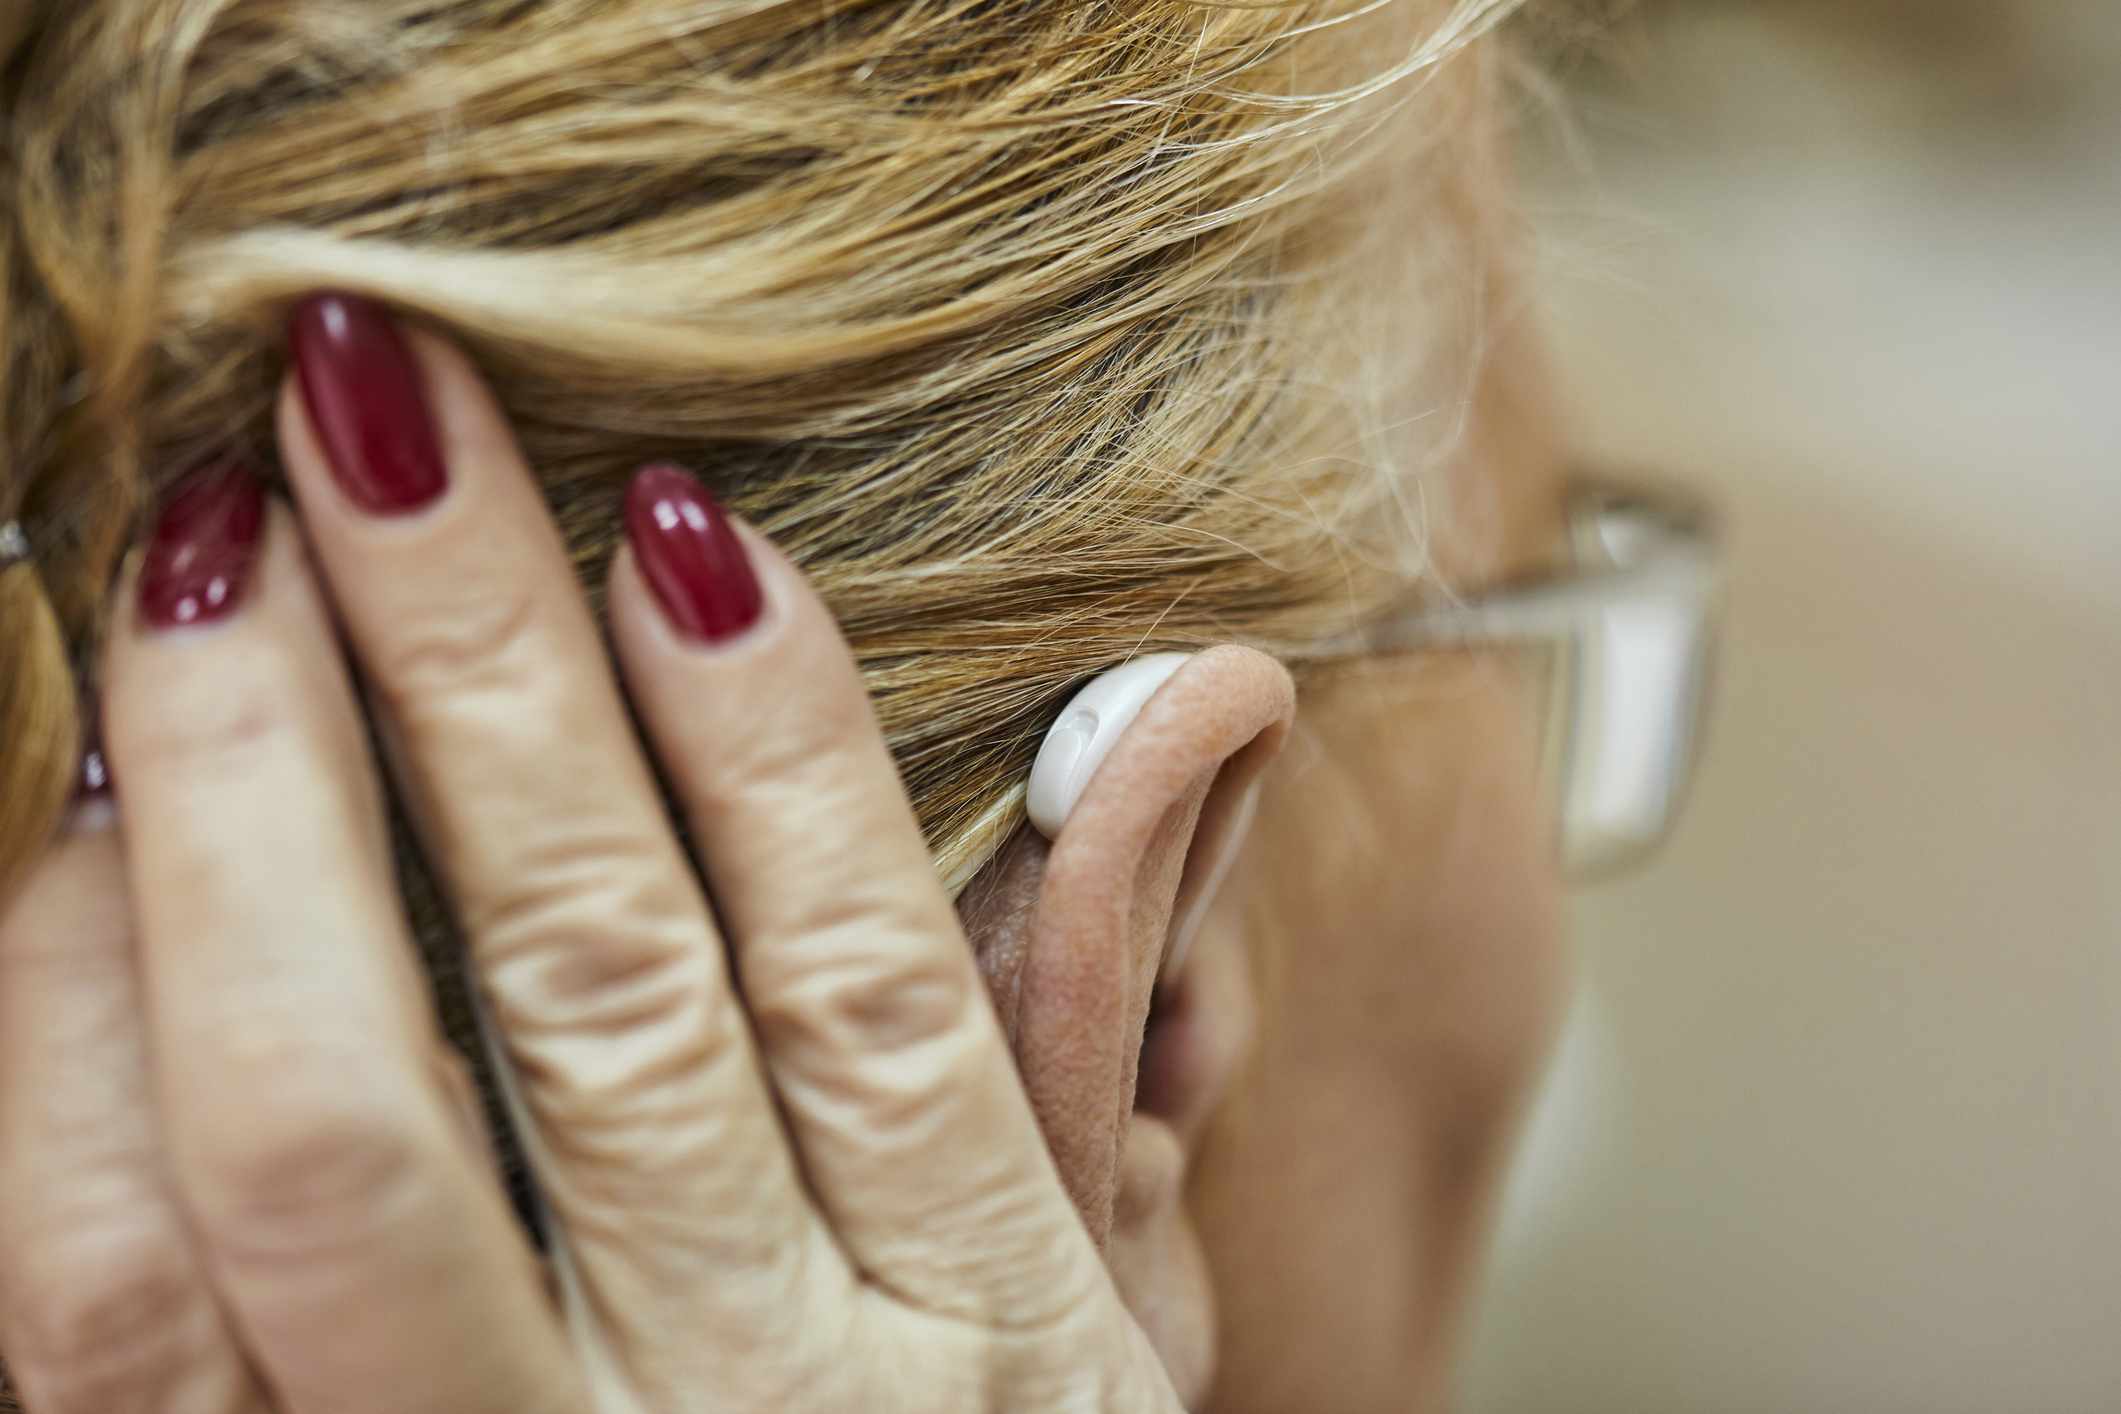 Used Hearing Aids: Can You Buy or Sell Them?